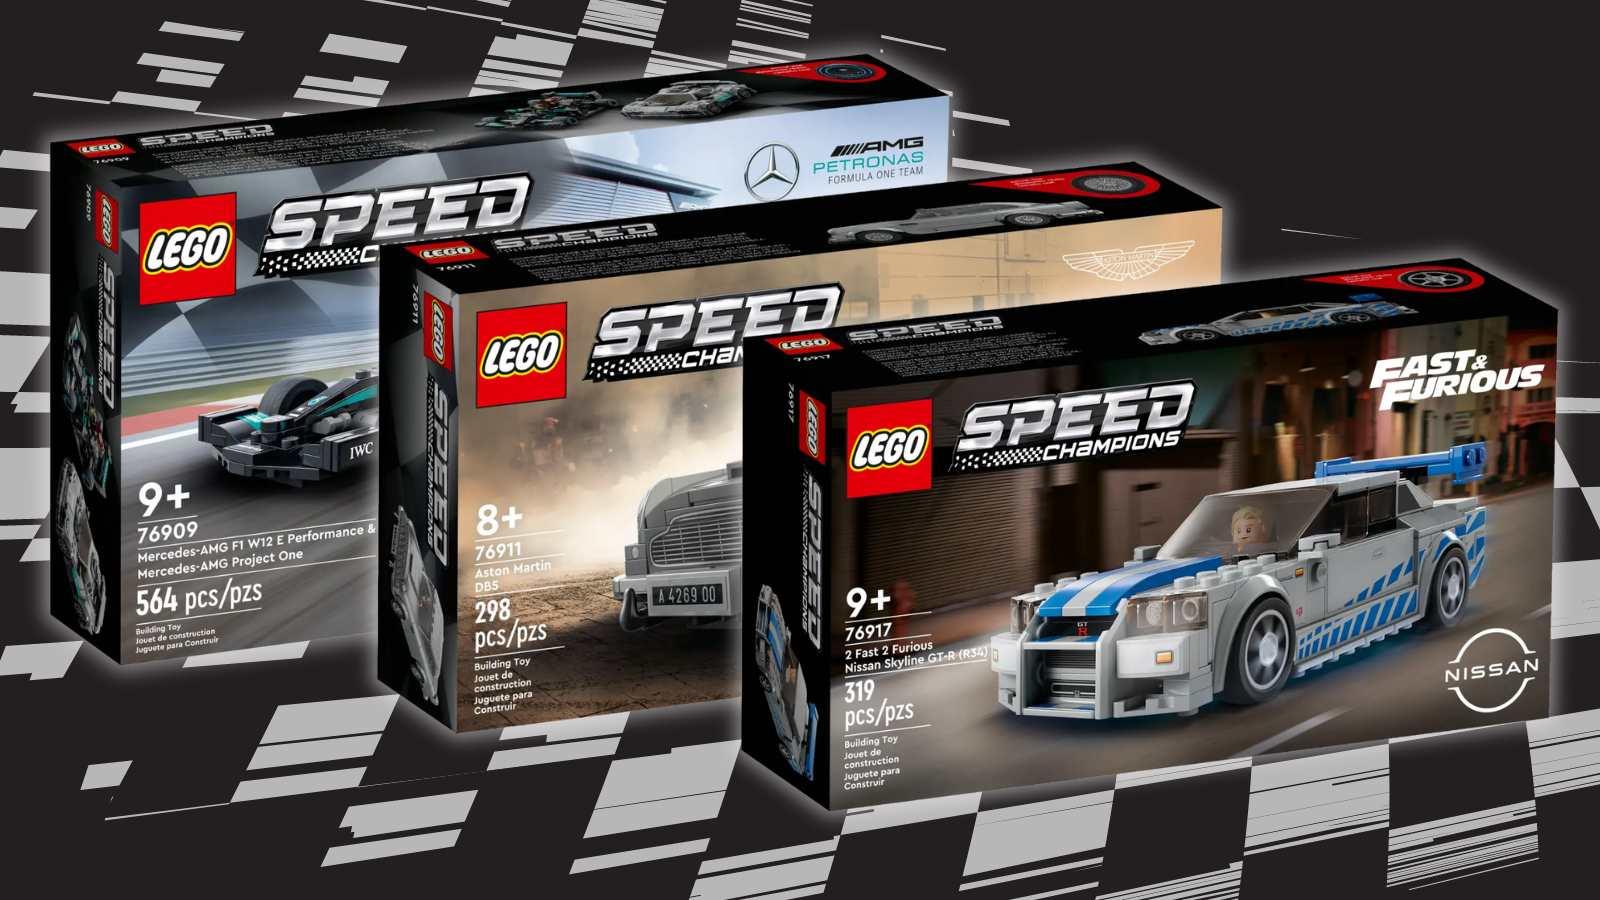 LEGO Speed Champions models on black background with racing-flag graphic.